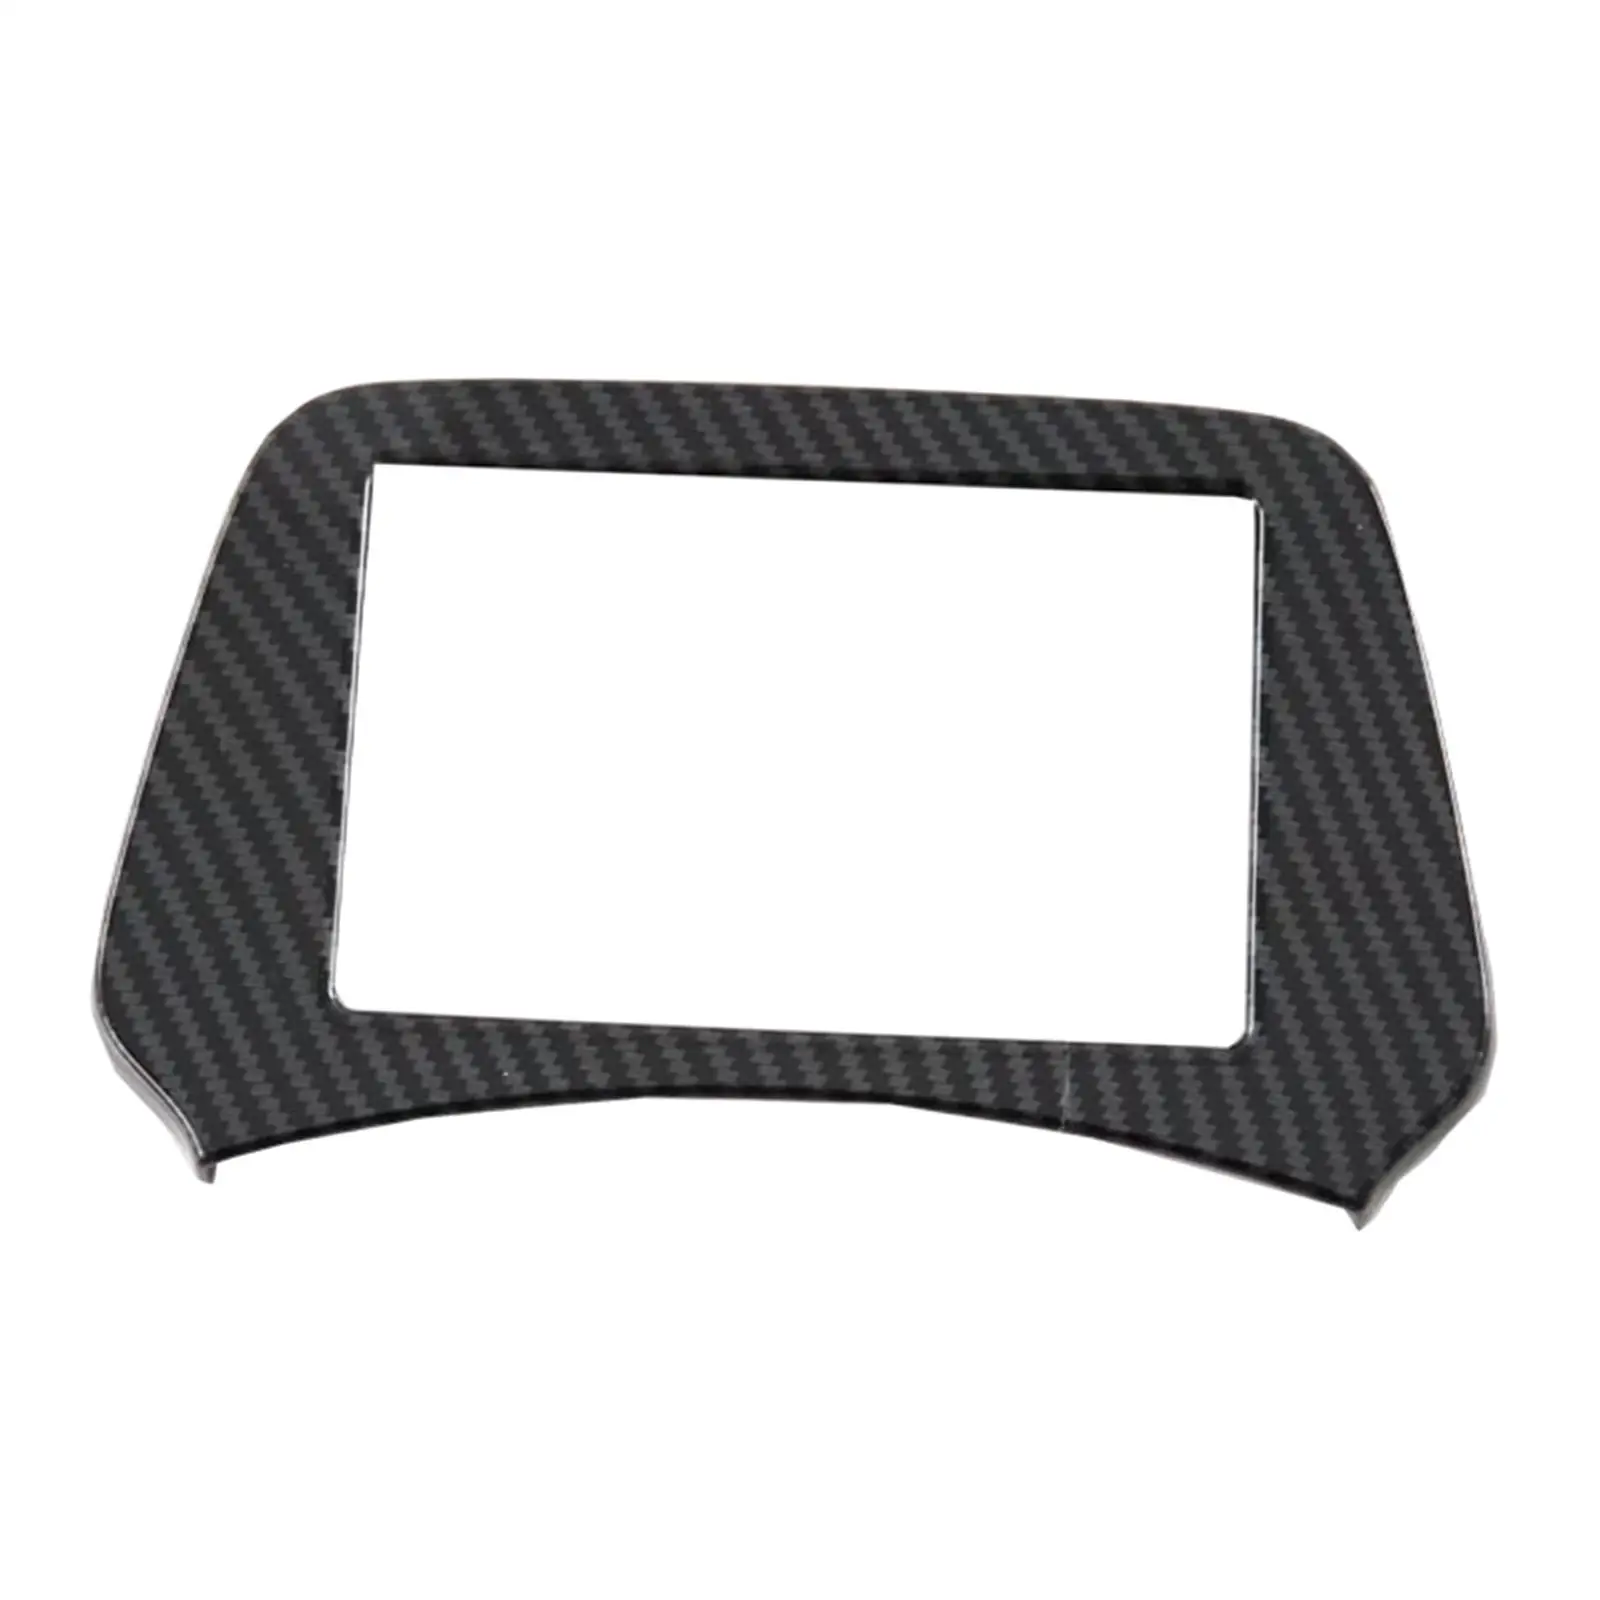 Dial Dashboard Trim Cover Frame Accessory Practical Easy to Install Durable Car